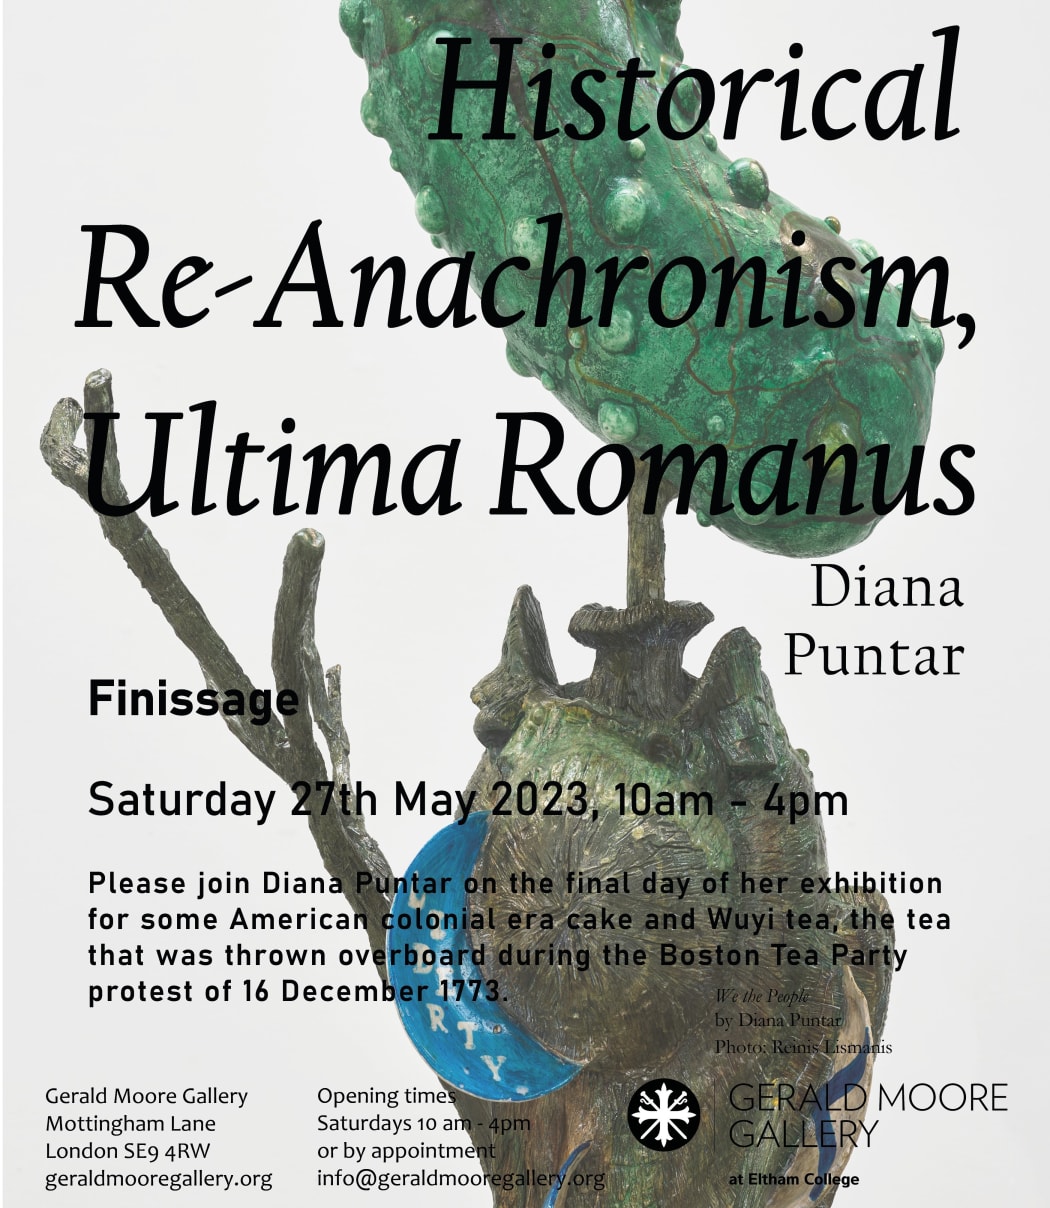 Finissage for 'Historical Re-Anachronism, Ultima Romanus' Saturday 27th May, 10am - 4pm